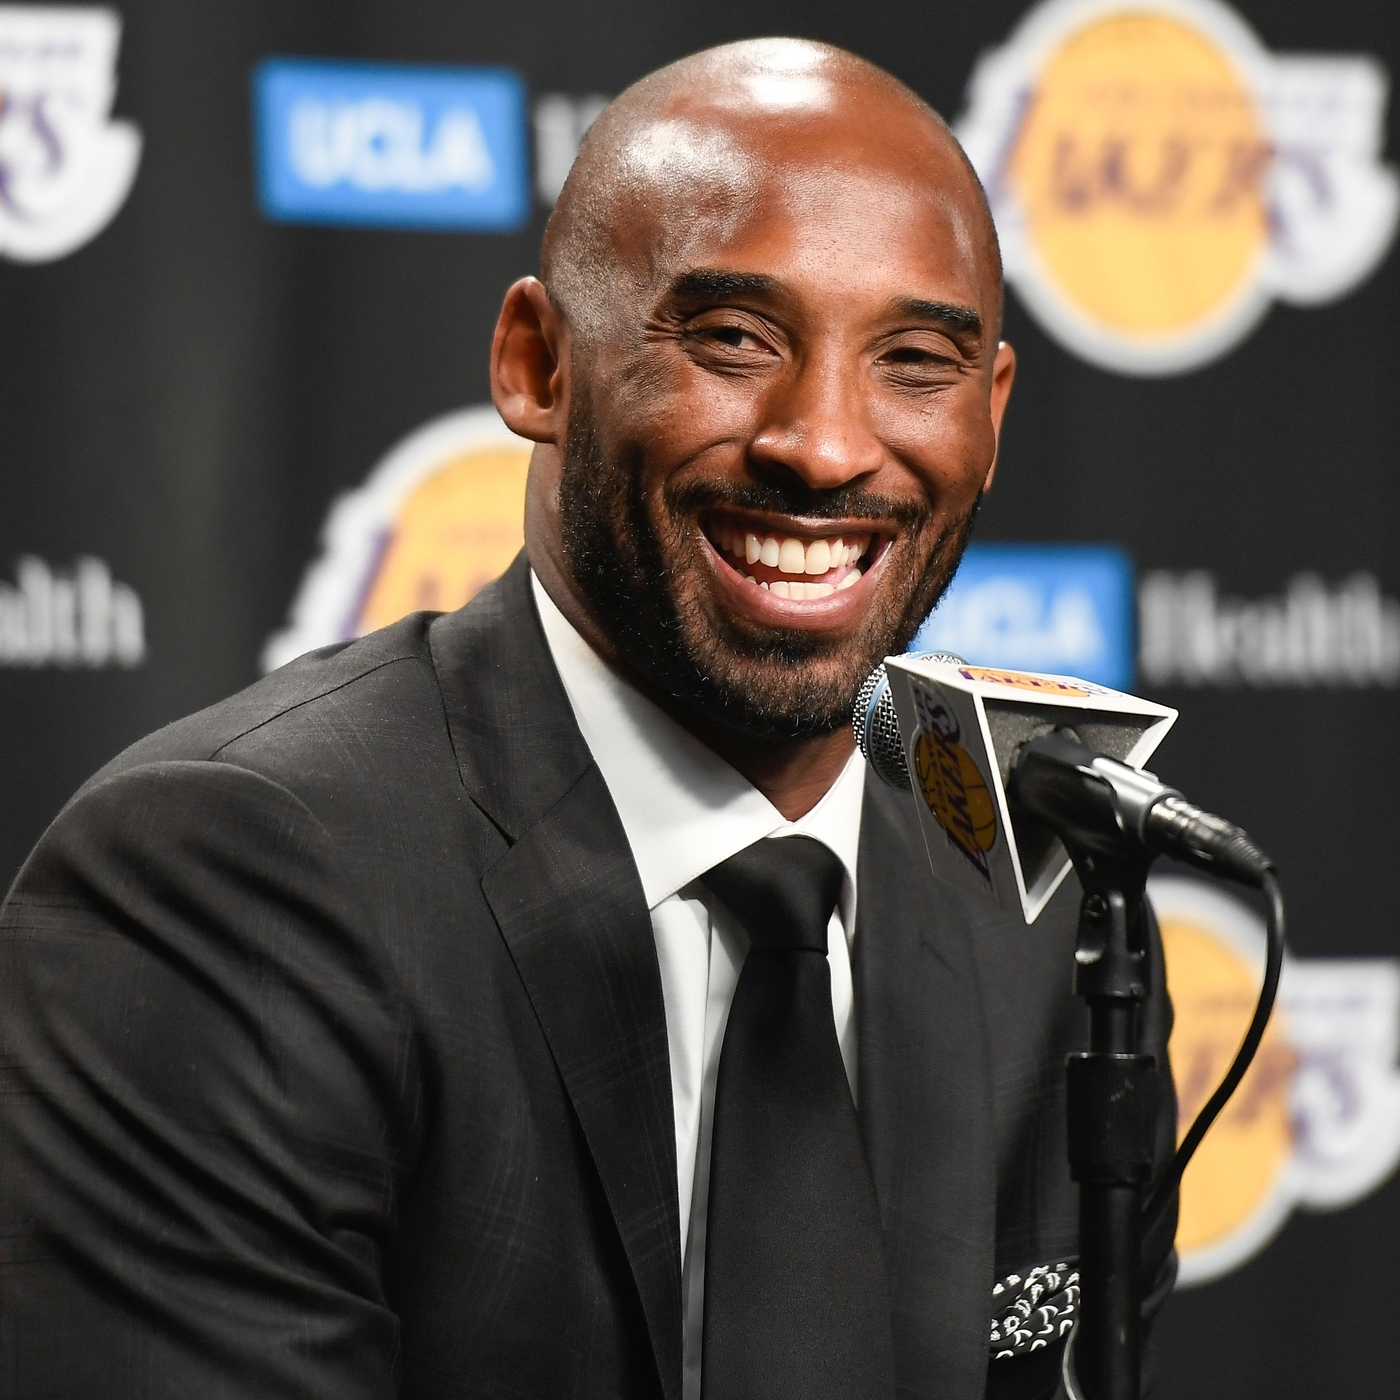 Kobe's Retirement, New Arenas, and the Christmas Day Games